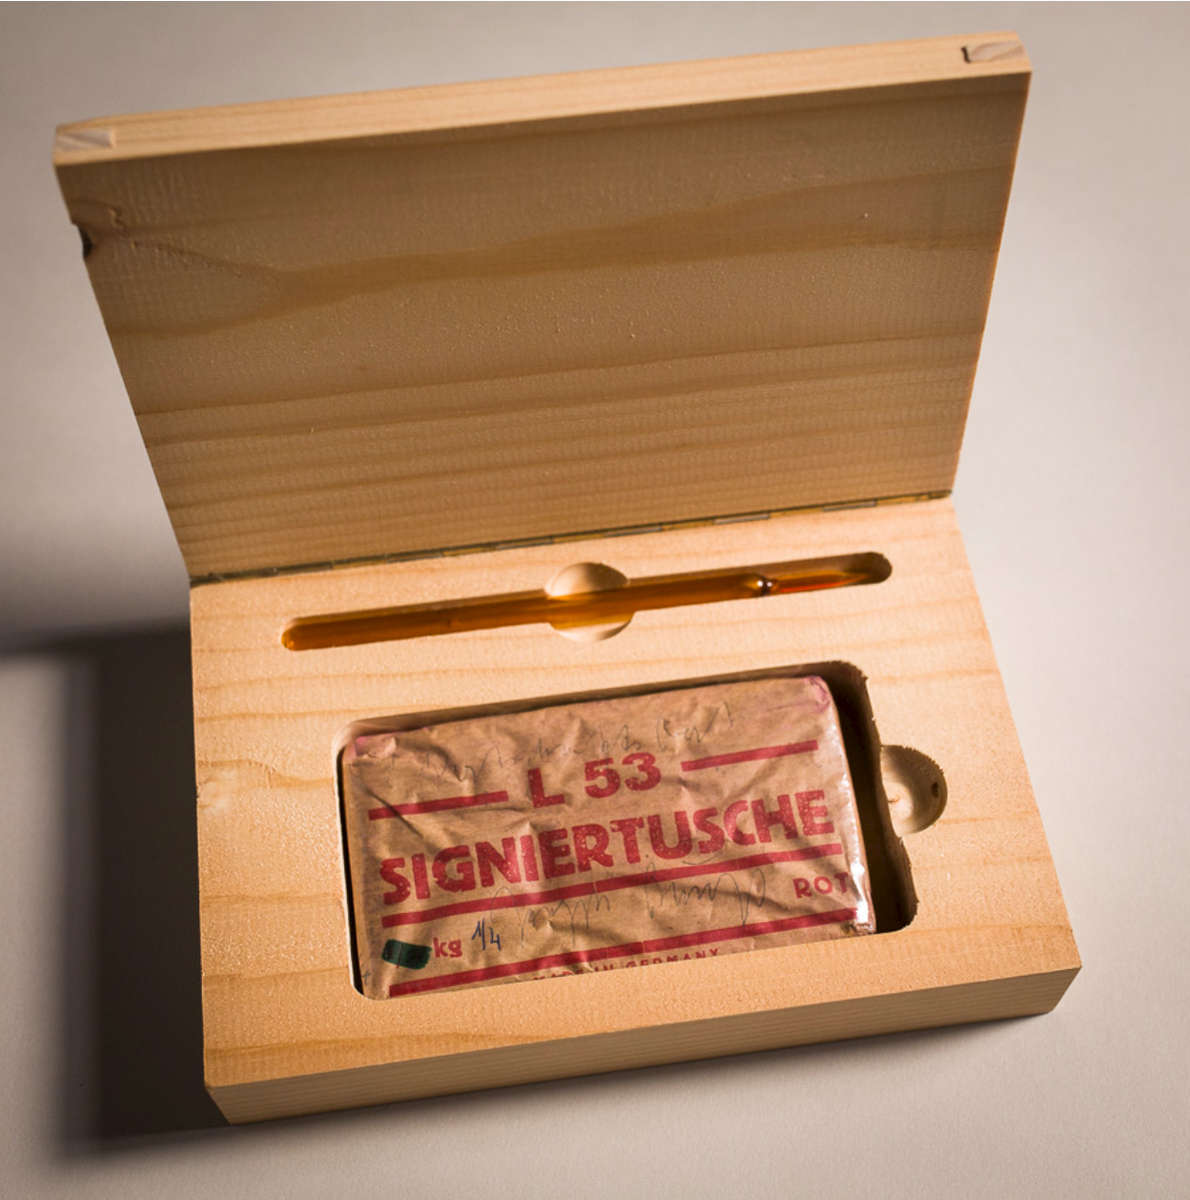 Joseph BEUYS (1921 - 1986)Economic Value Signature Ink (Wirtschaftswert Signiertusche)Block of signature ink in wrapper, with handwritten addition, and glass pen; in wooden box4 1/2 x 8 1/4 x 2 in (14 x 21 x 5 cm)Signed in pencil {quote}Joseph Beuys{quote} and inscribed {quote}1 Wirtschaftswert{quote} on the ink wrapper; numbered 1/4 in blue ink; weight crossed-out in markerEdition 50 – The present work is number 1 of 4 AP's, aside from the edition of 50Publisher: Edition Staeck, HeidelbergPlease click HERE for full fact sheet